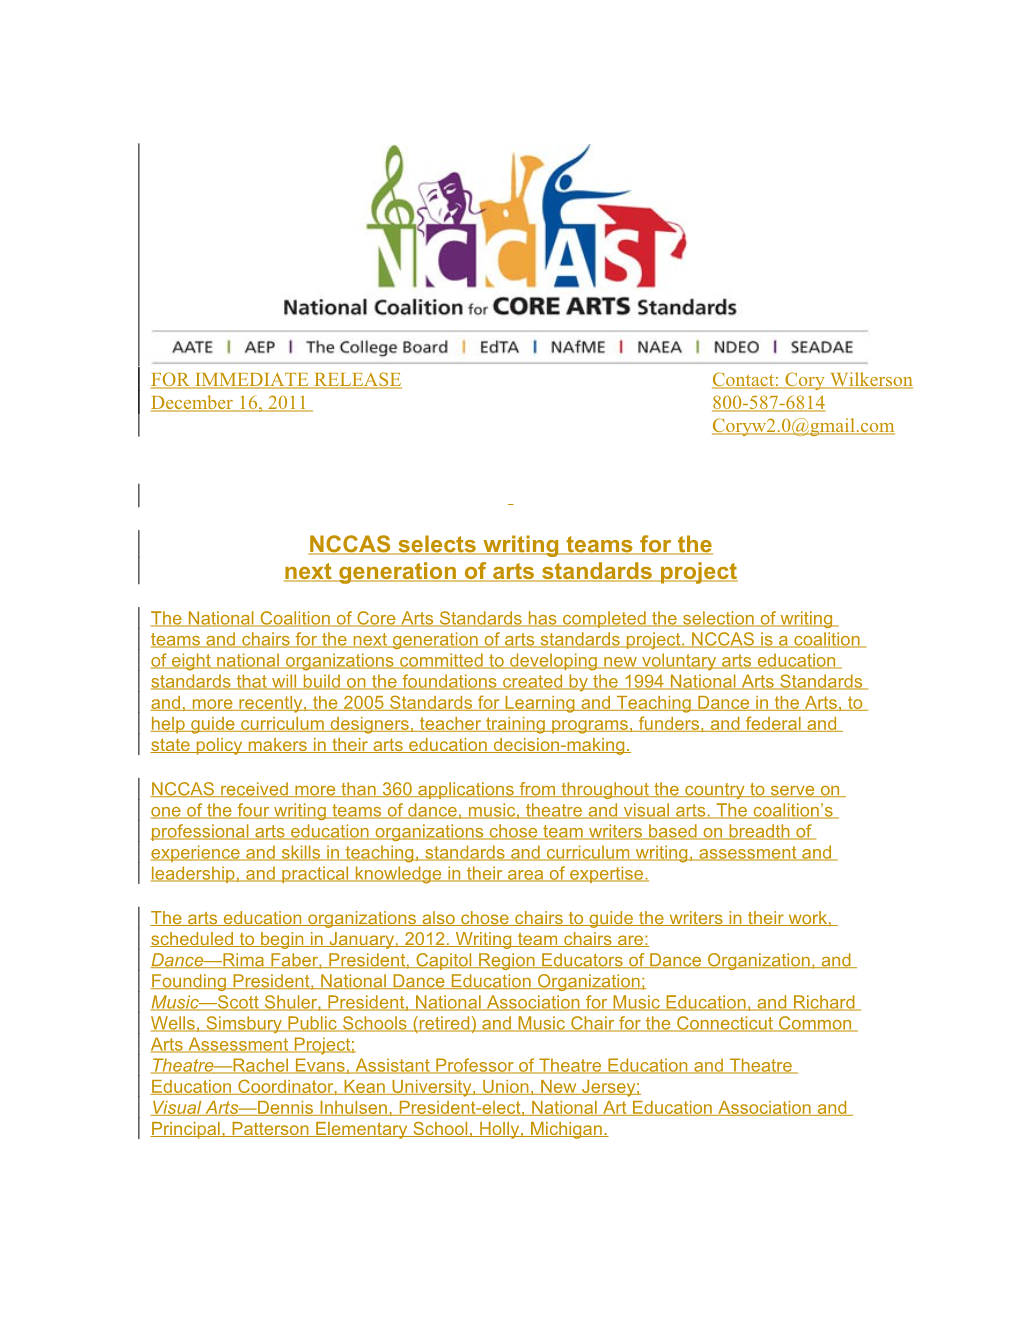 NCCAS Selects Writing Teams for the Next Generation of Arts Standards Project